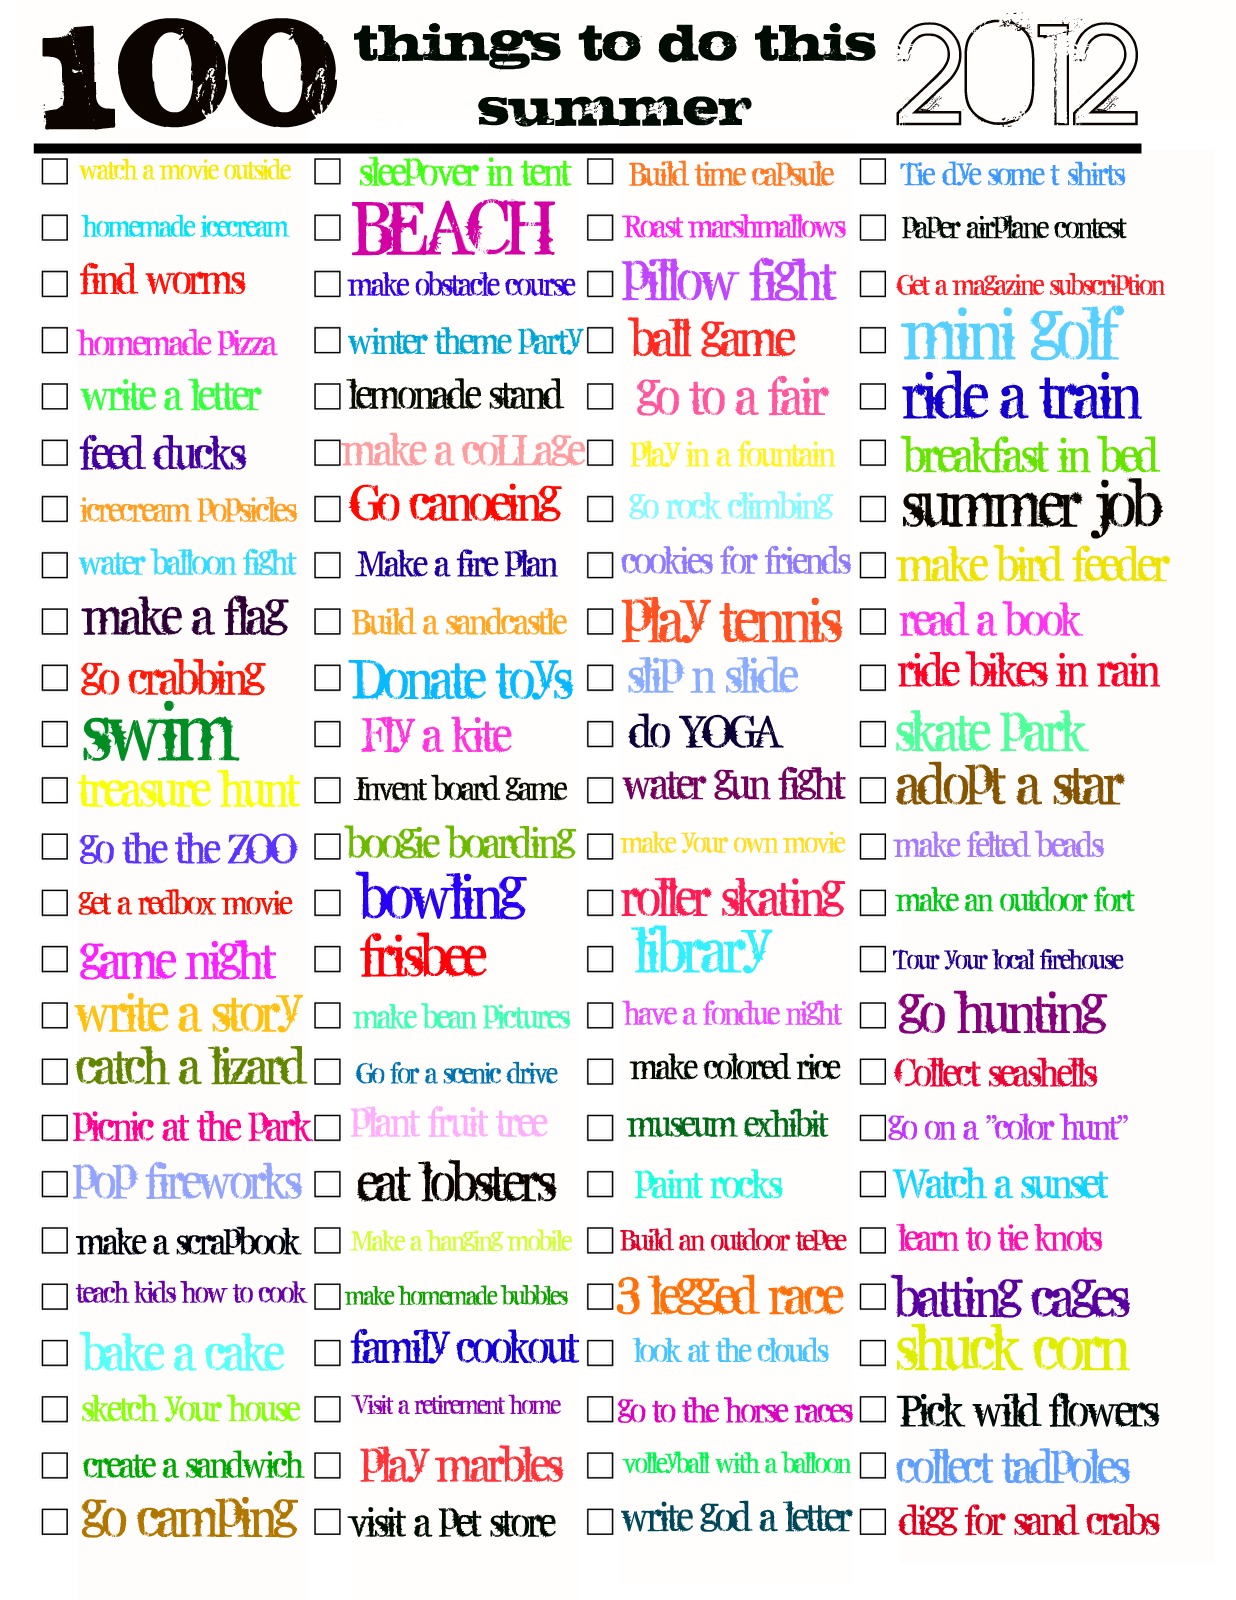 Cool Summer To Do List List 100 Things to Do This Summer